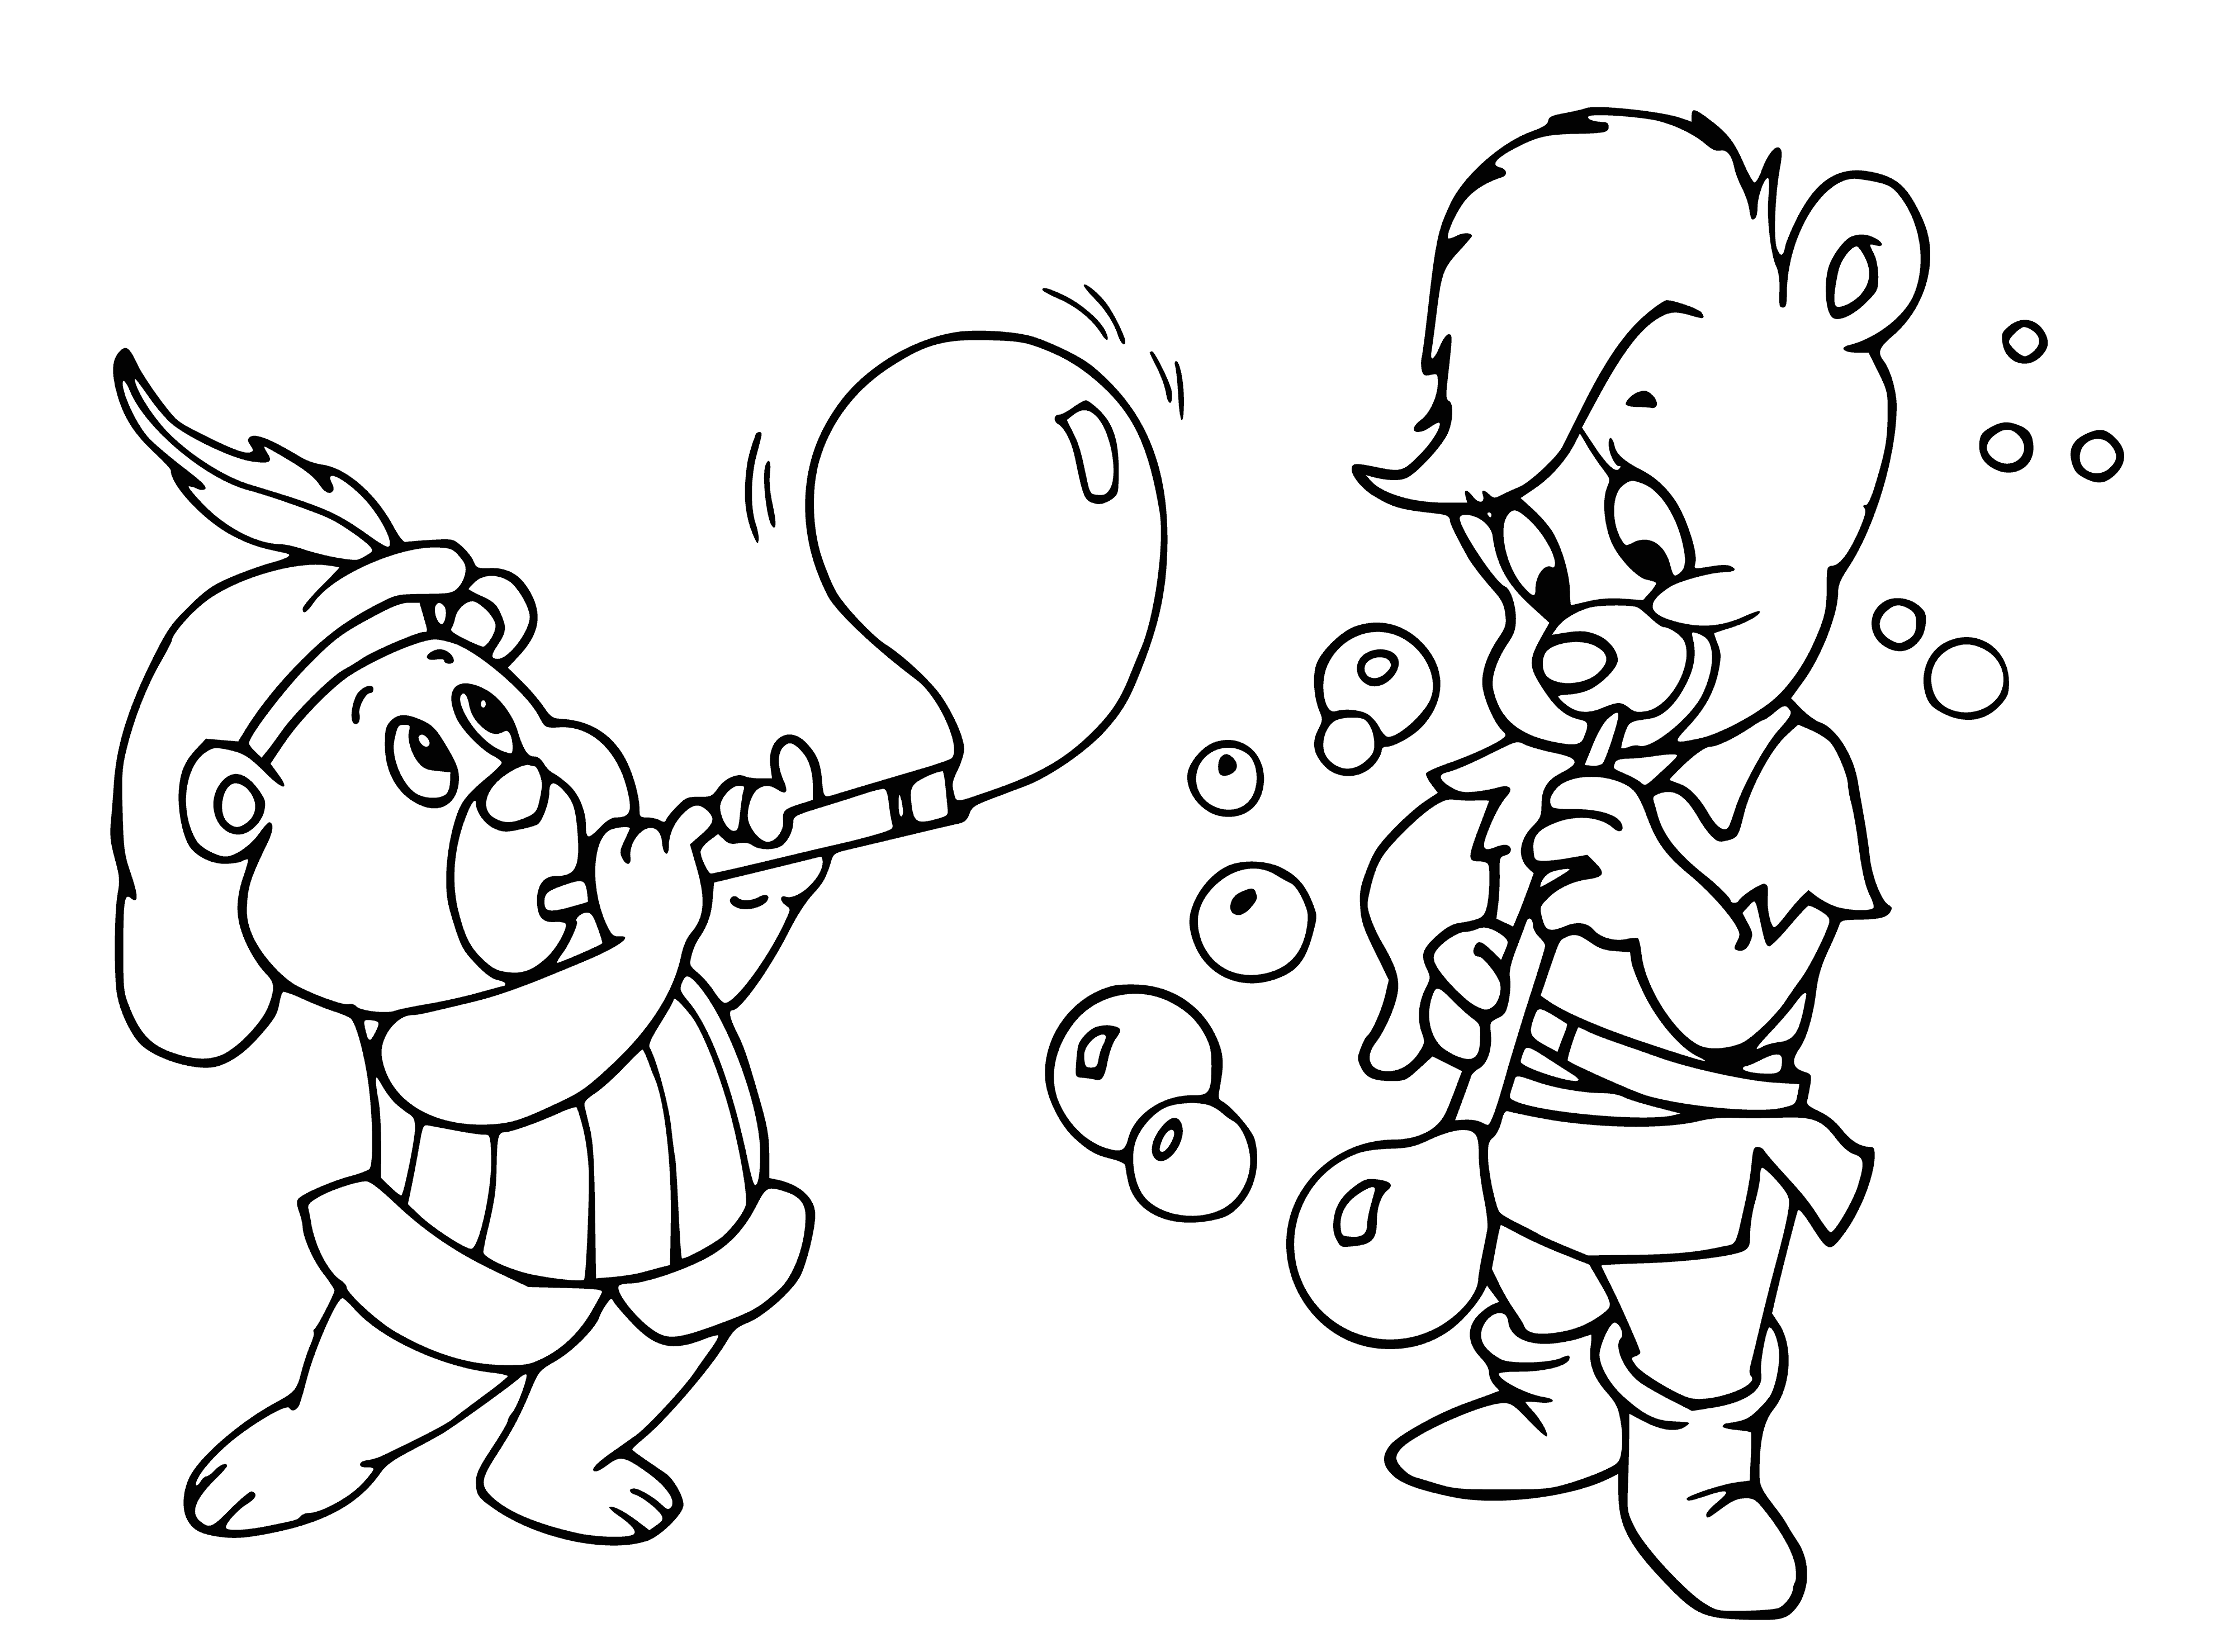 coloring page: A chubby, bald baby with big, round eyes lies on the ground, reaching up to a bright sun with a smile on their face.